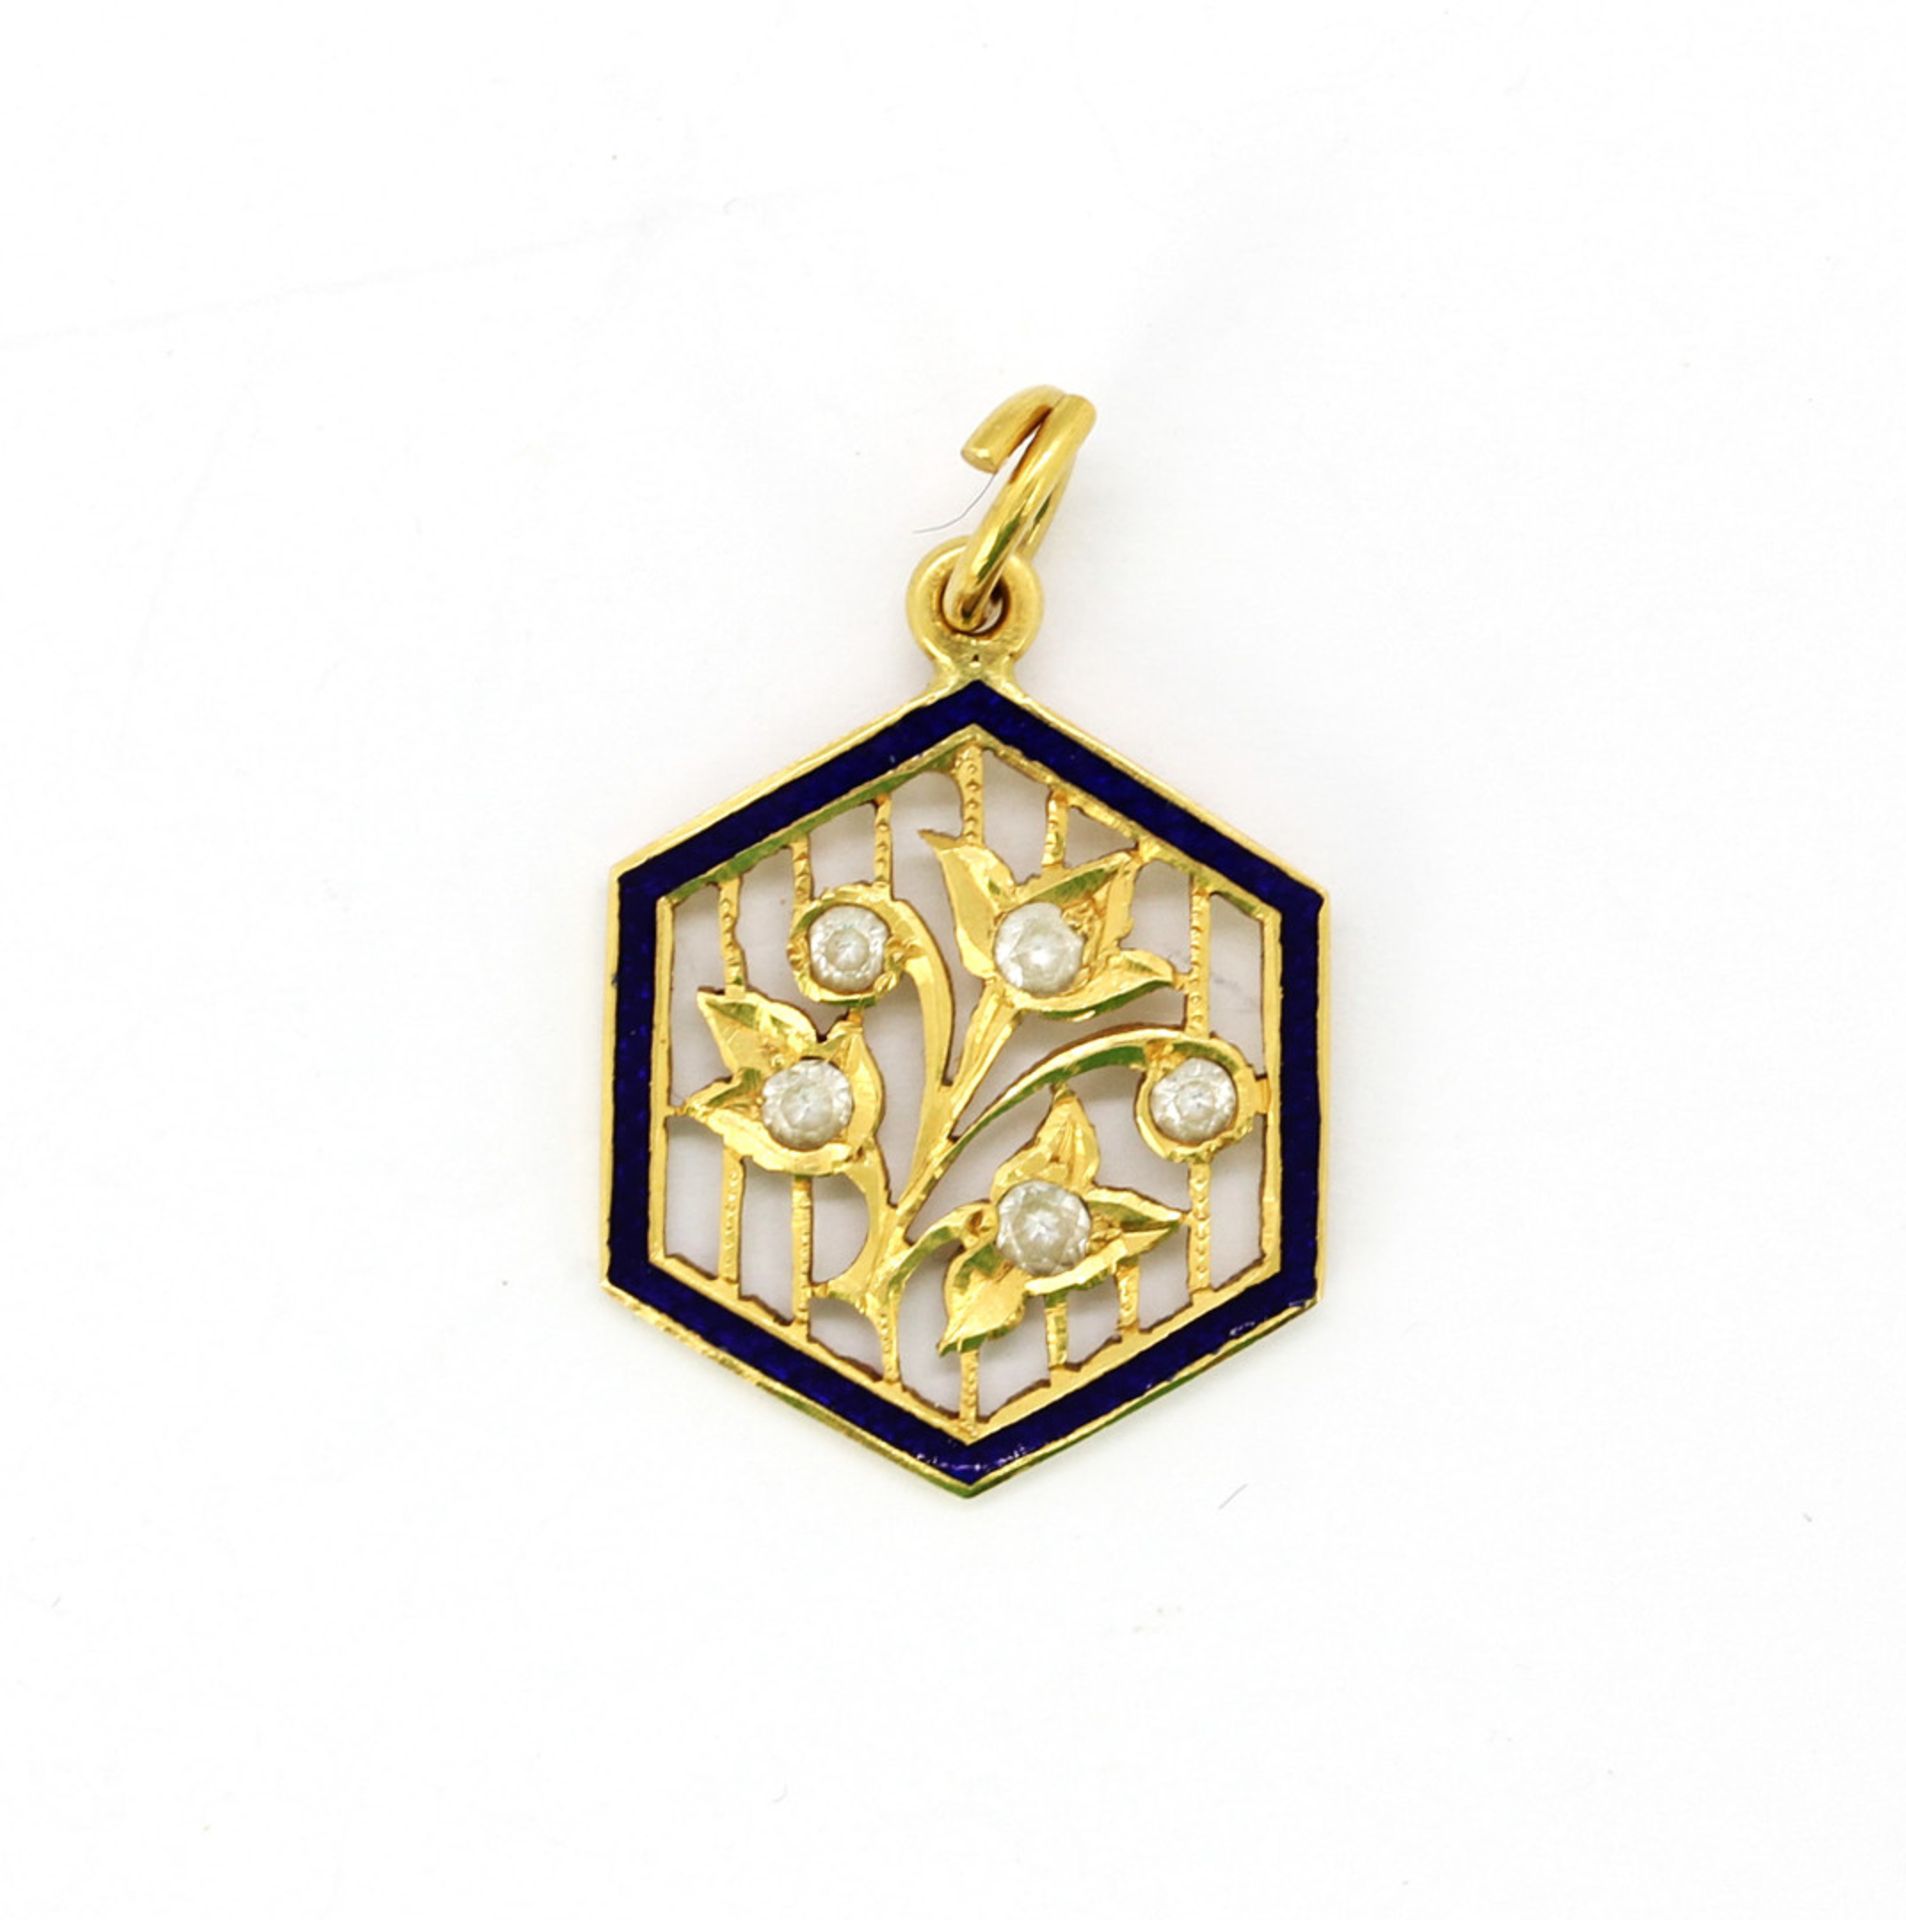 A yellow metal (tested high-carat gold) flower pendant set with round cut white sapphires, L. 2.